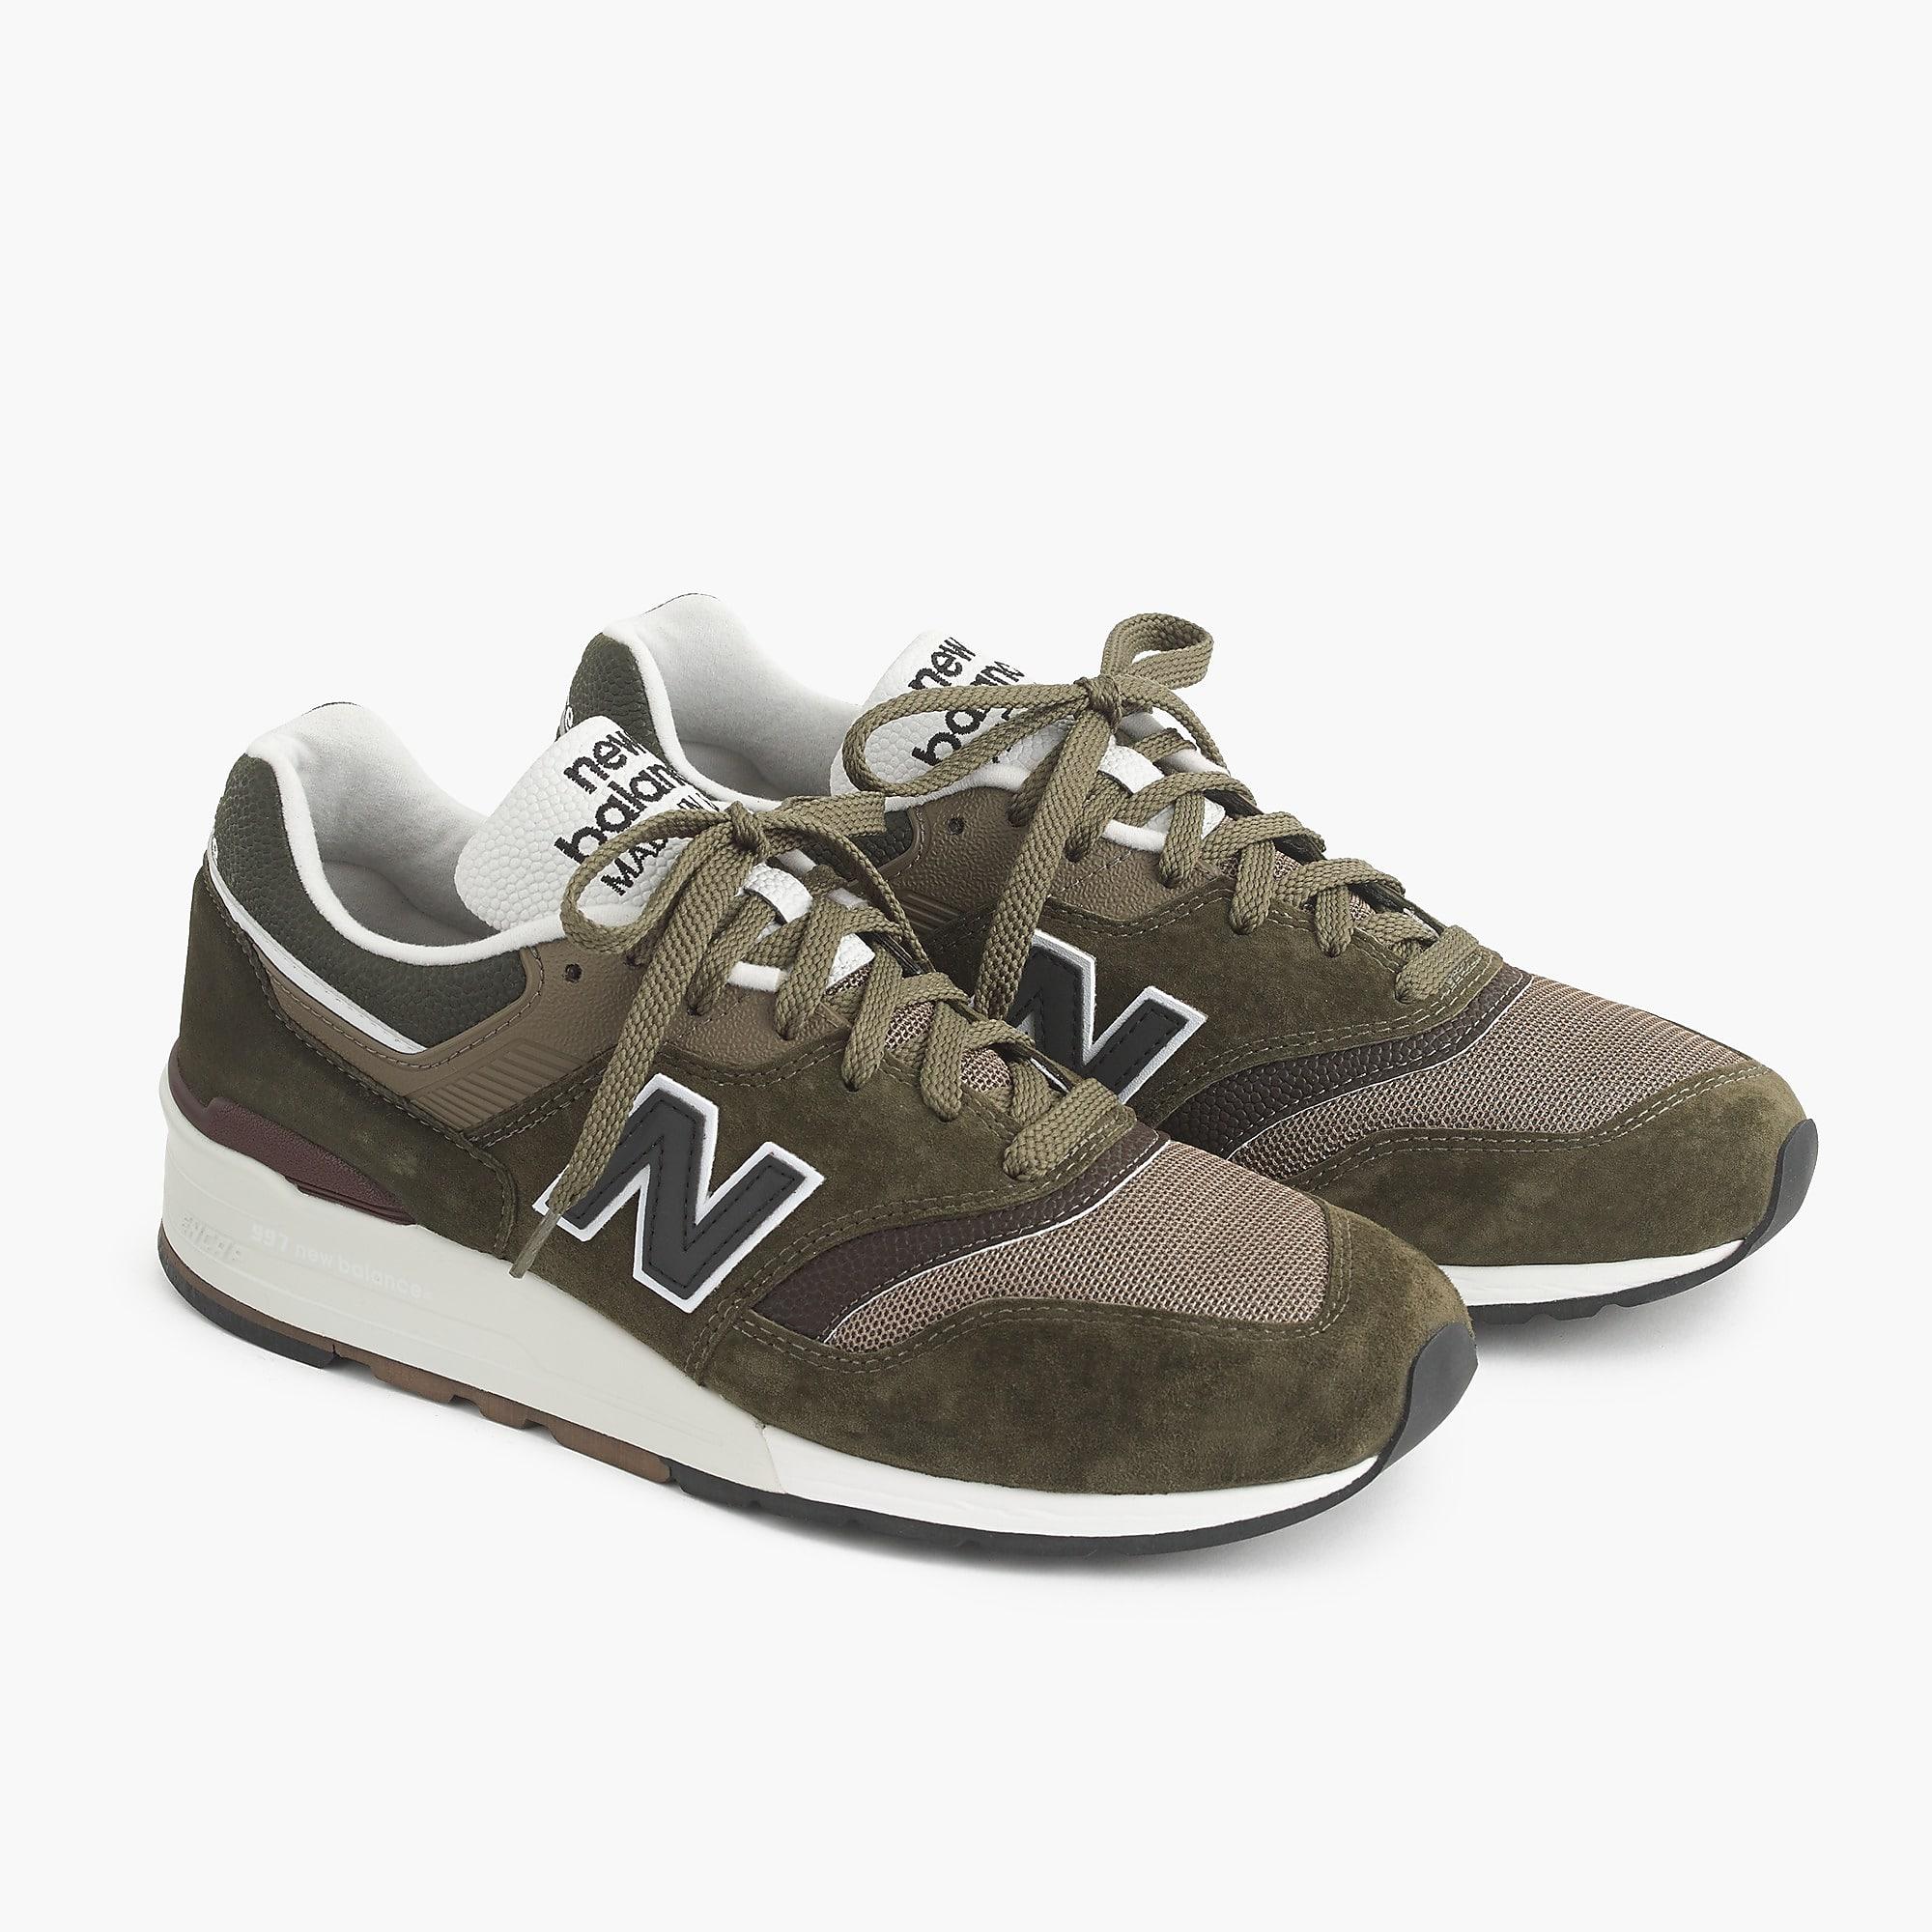 New Balance Suede 997 Camo Sneakers in Military (Green) for Men - Lyst